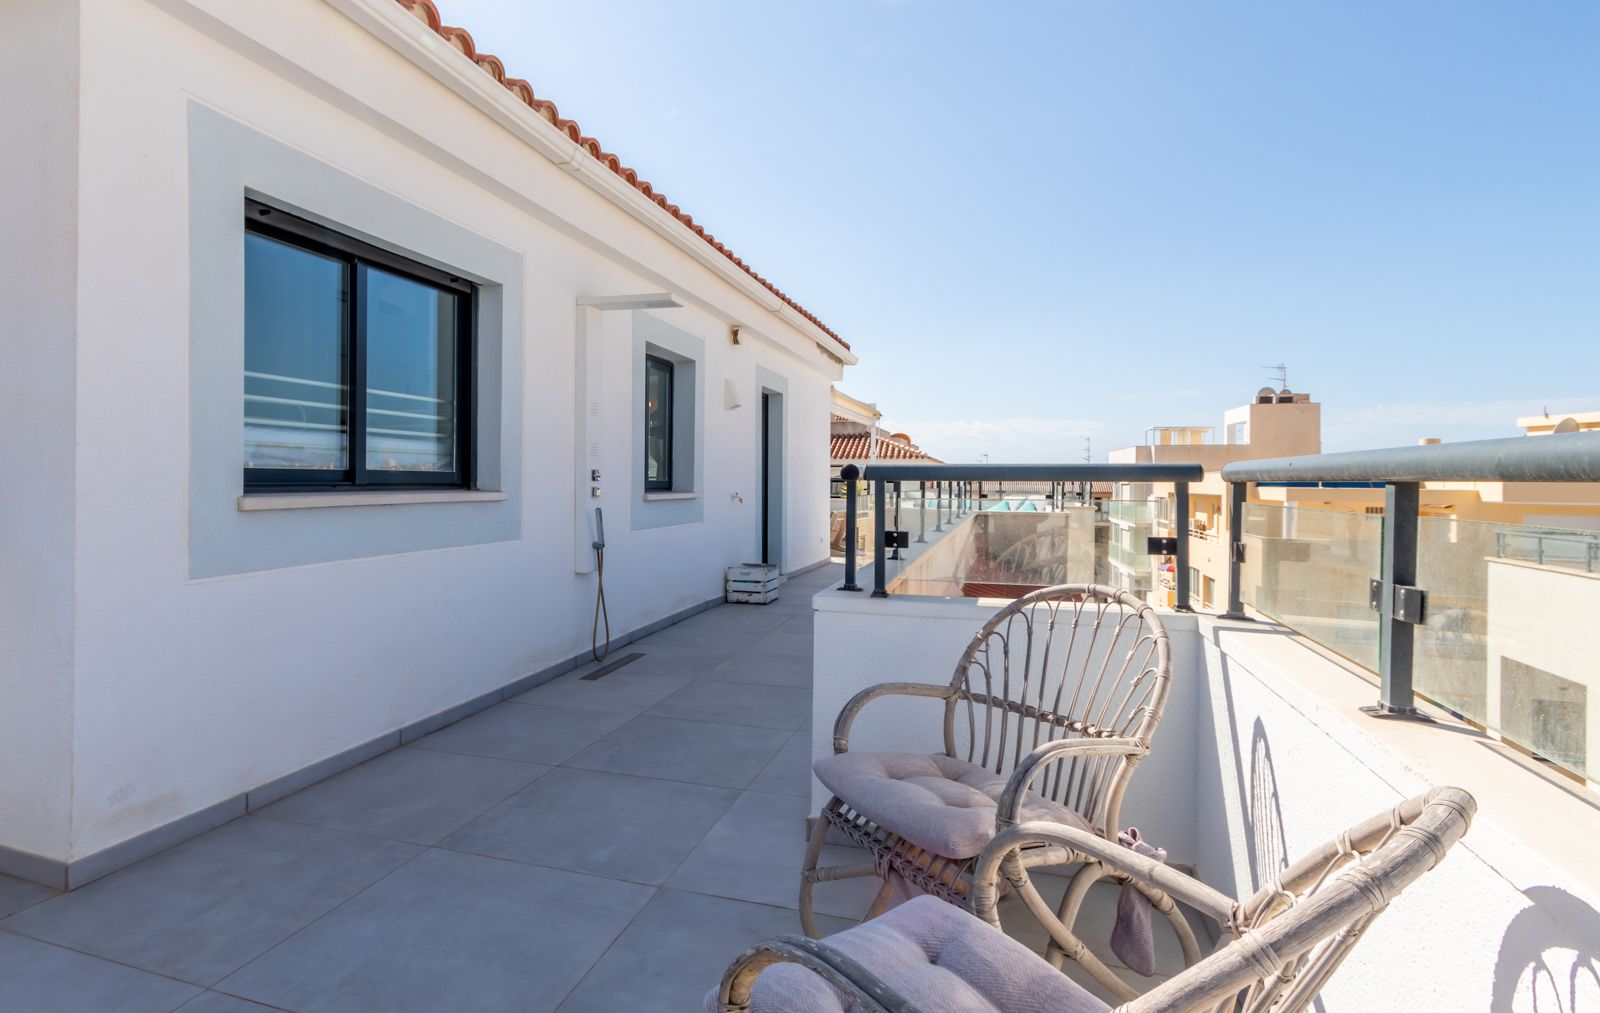 2 Bedroom Penthouse for Sale in the Centre of Moraira